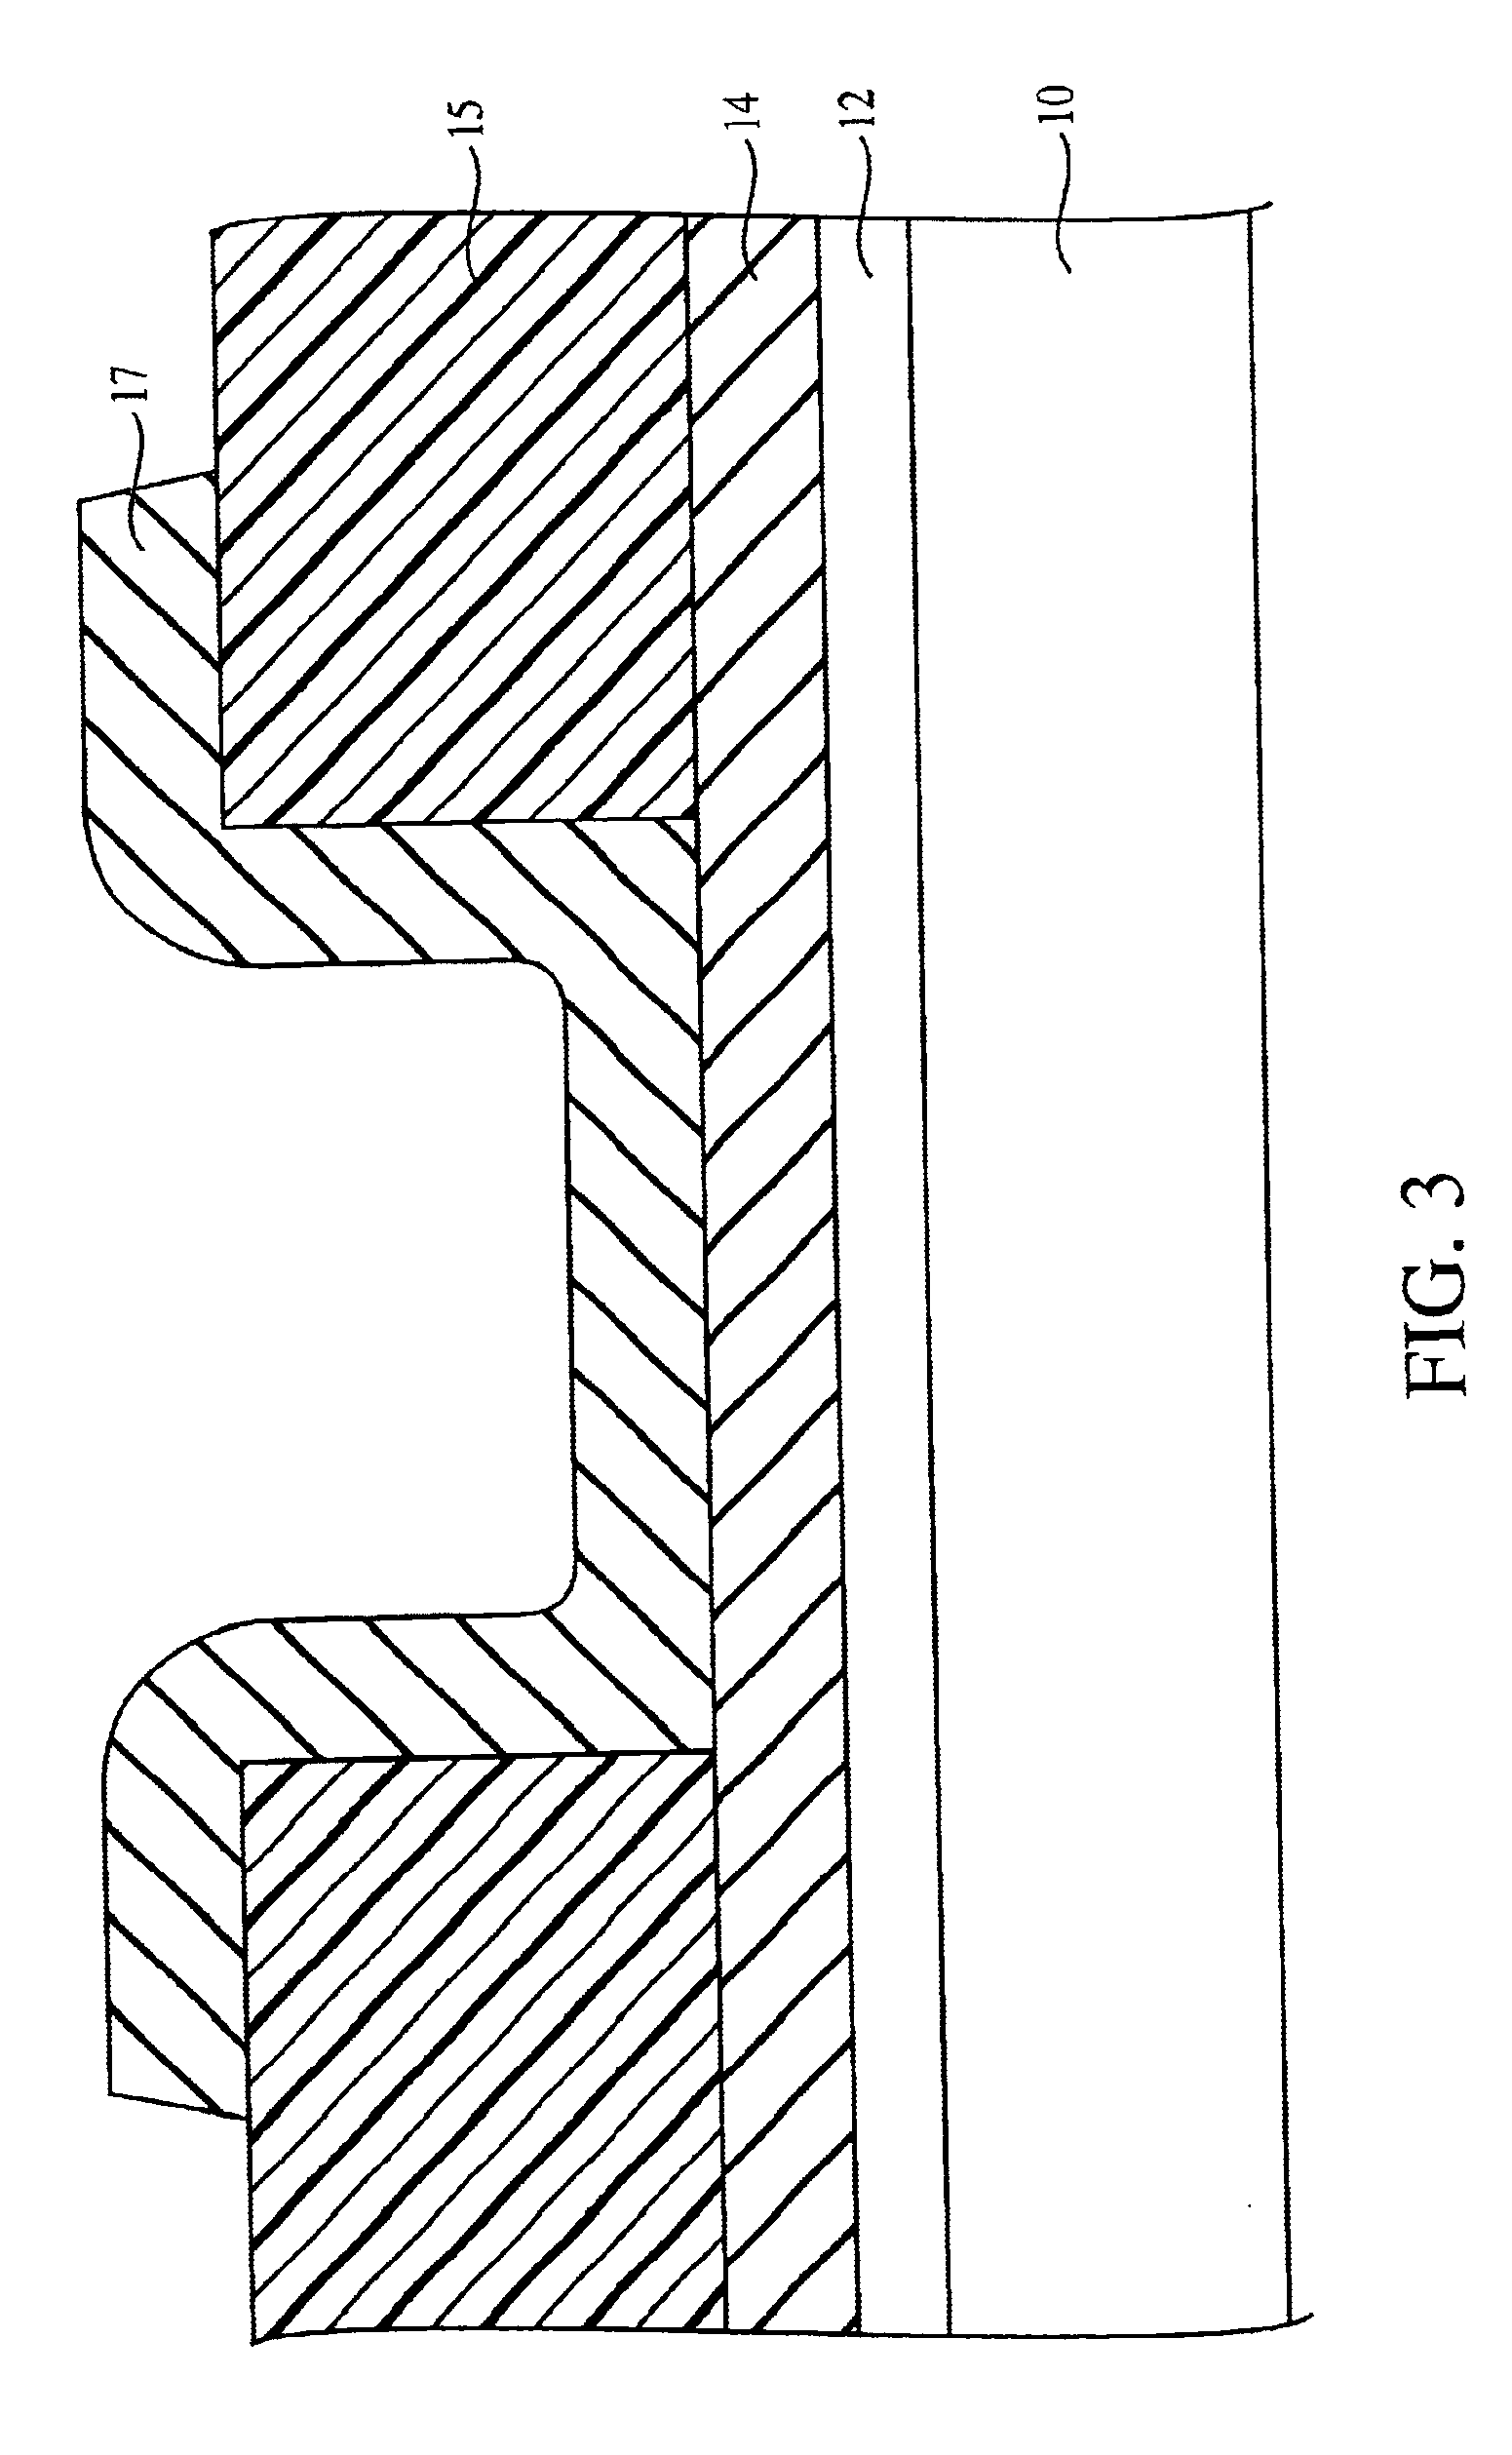 Method to control silver concentration in a resistance variable memory element